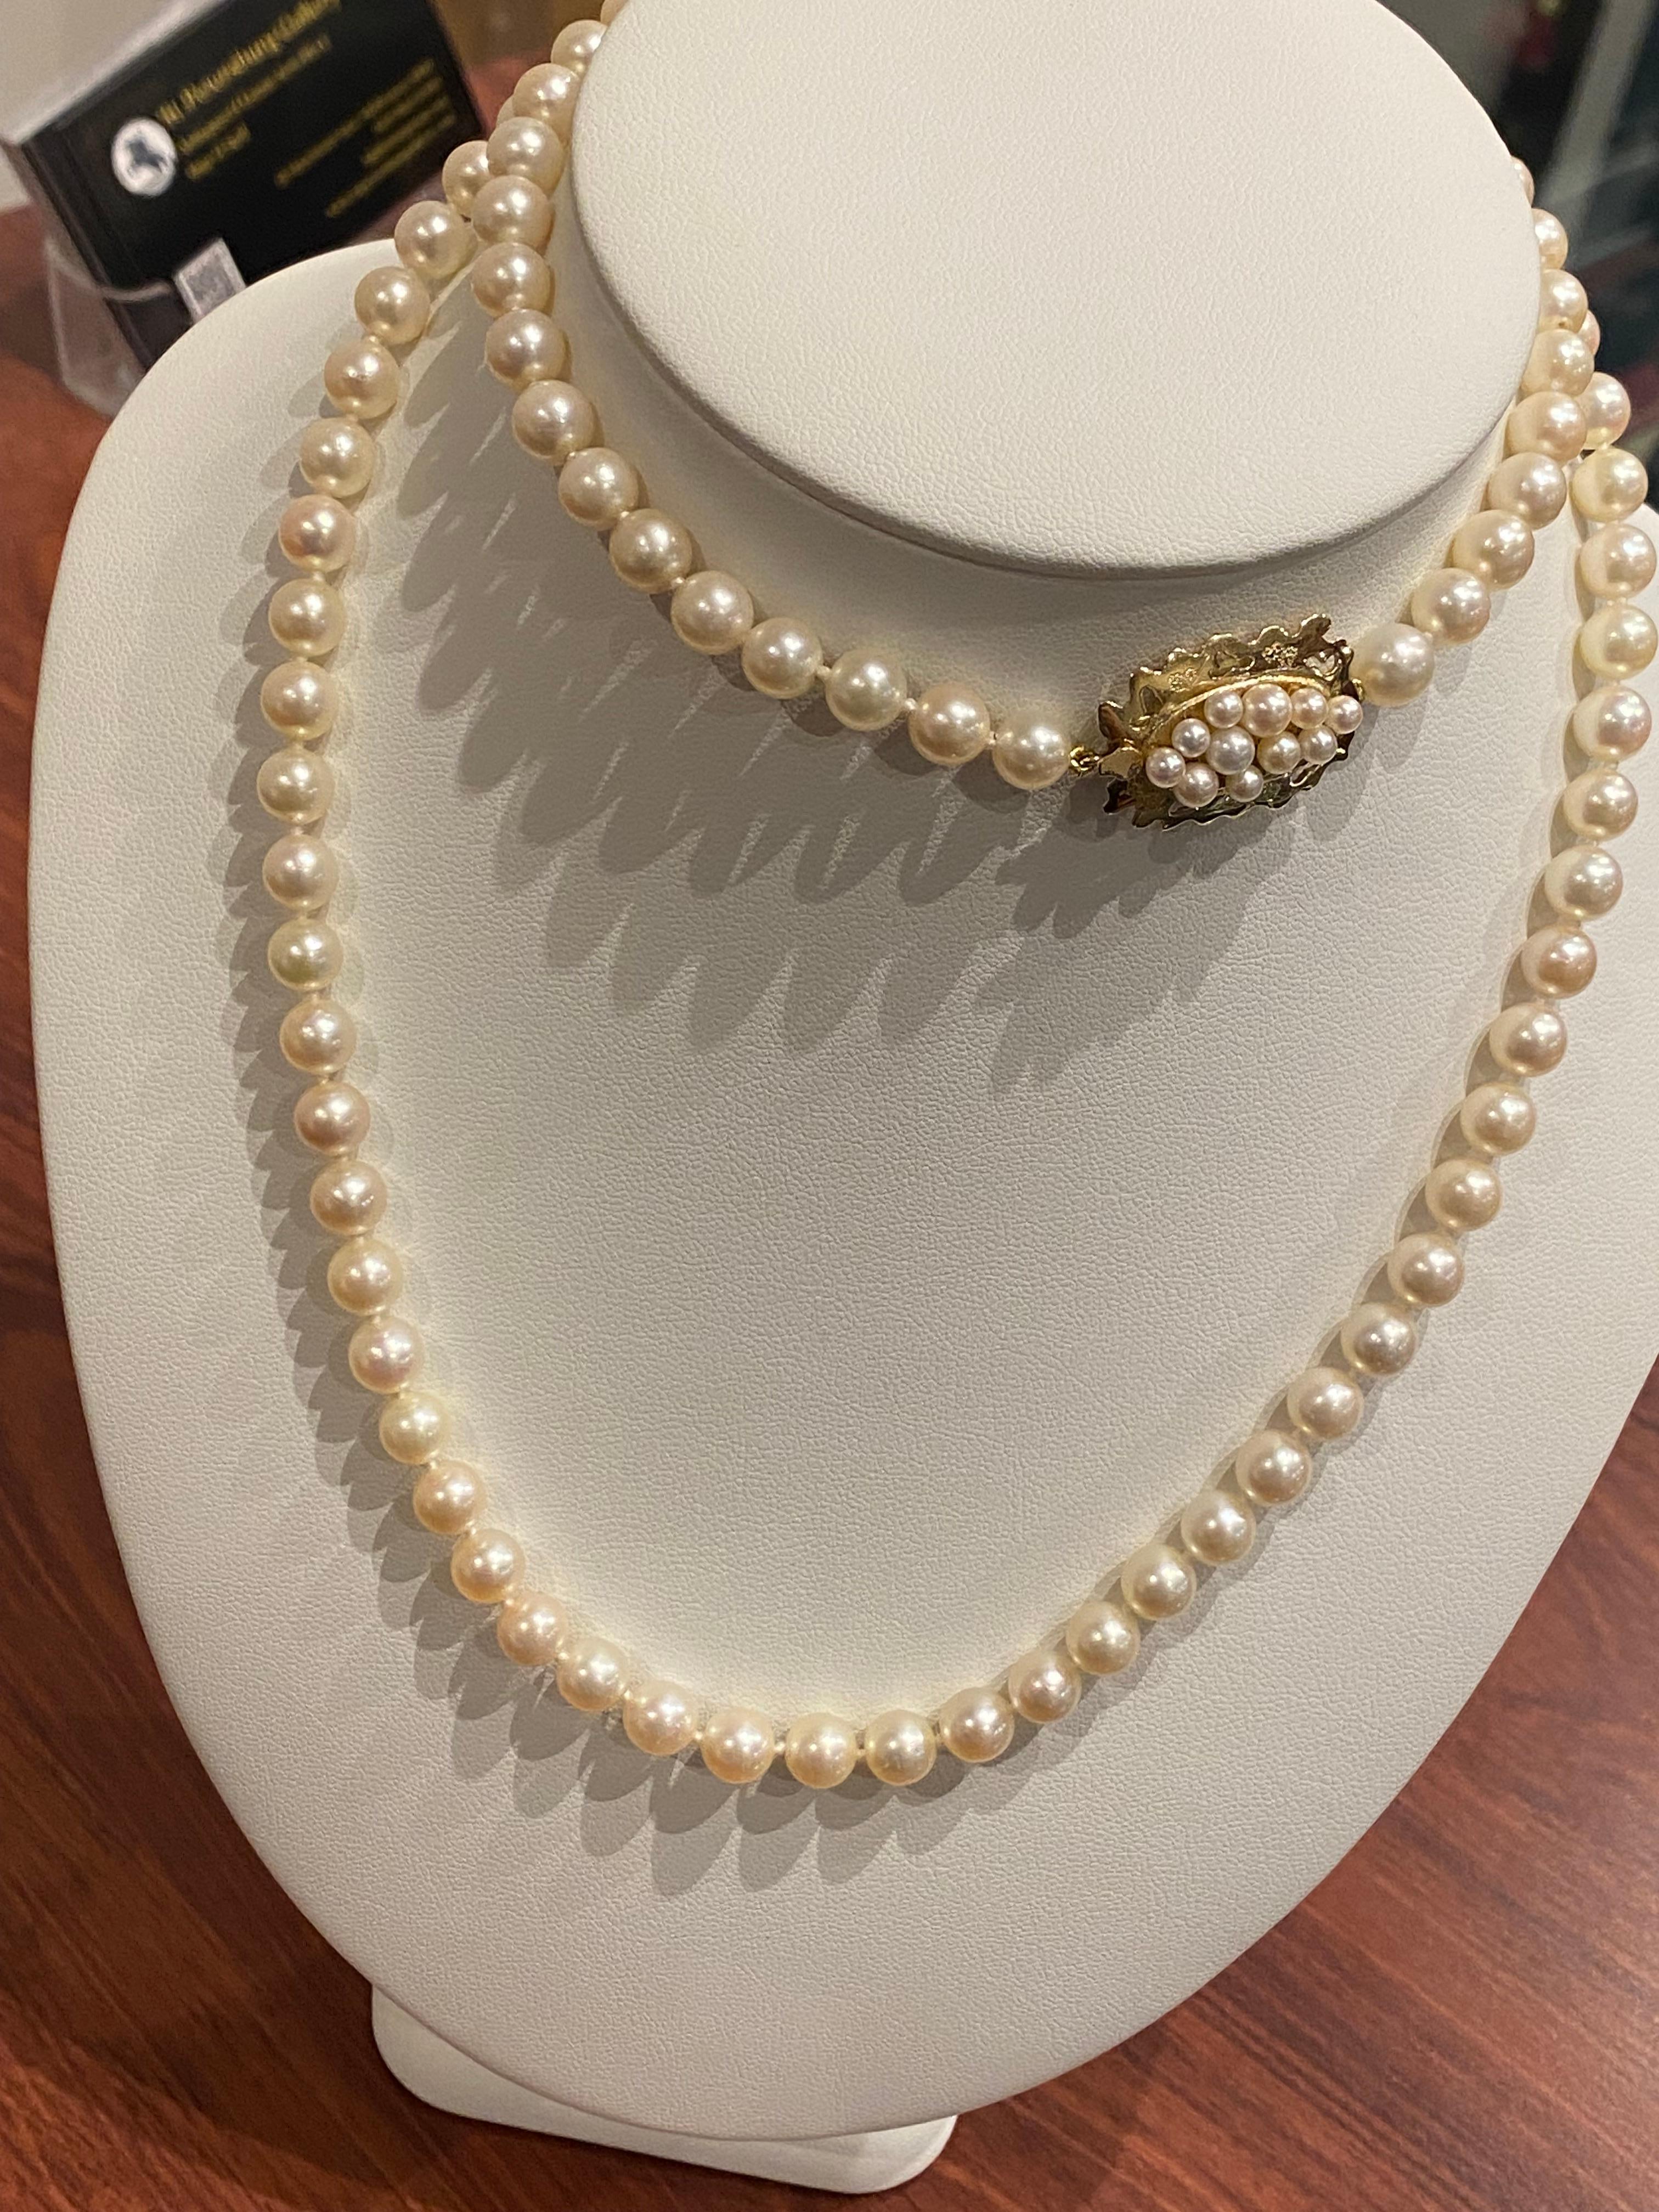 South Sea Pearl Opera Length 78cm (30.7 inches) Necklace 18K Gold & Pearl Clasp For Sale 4